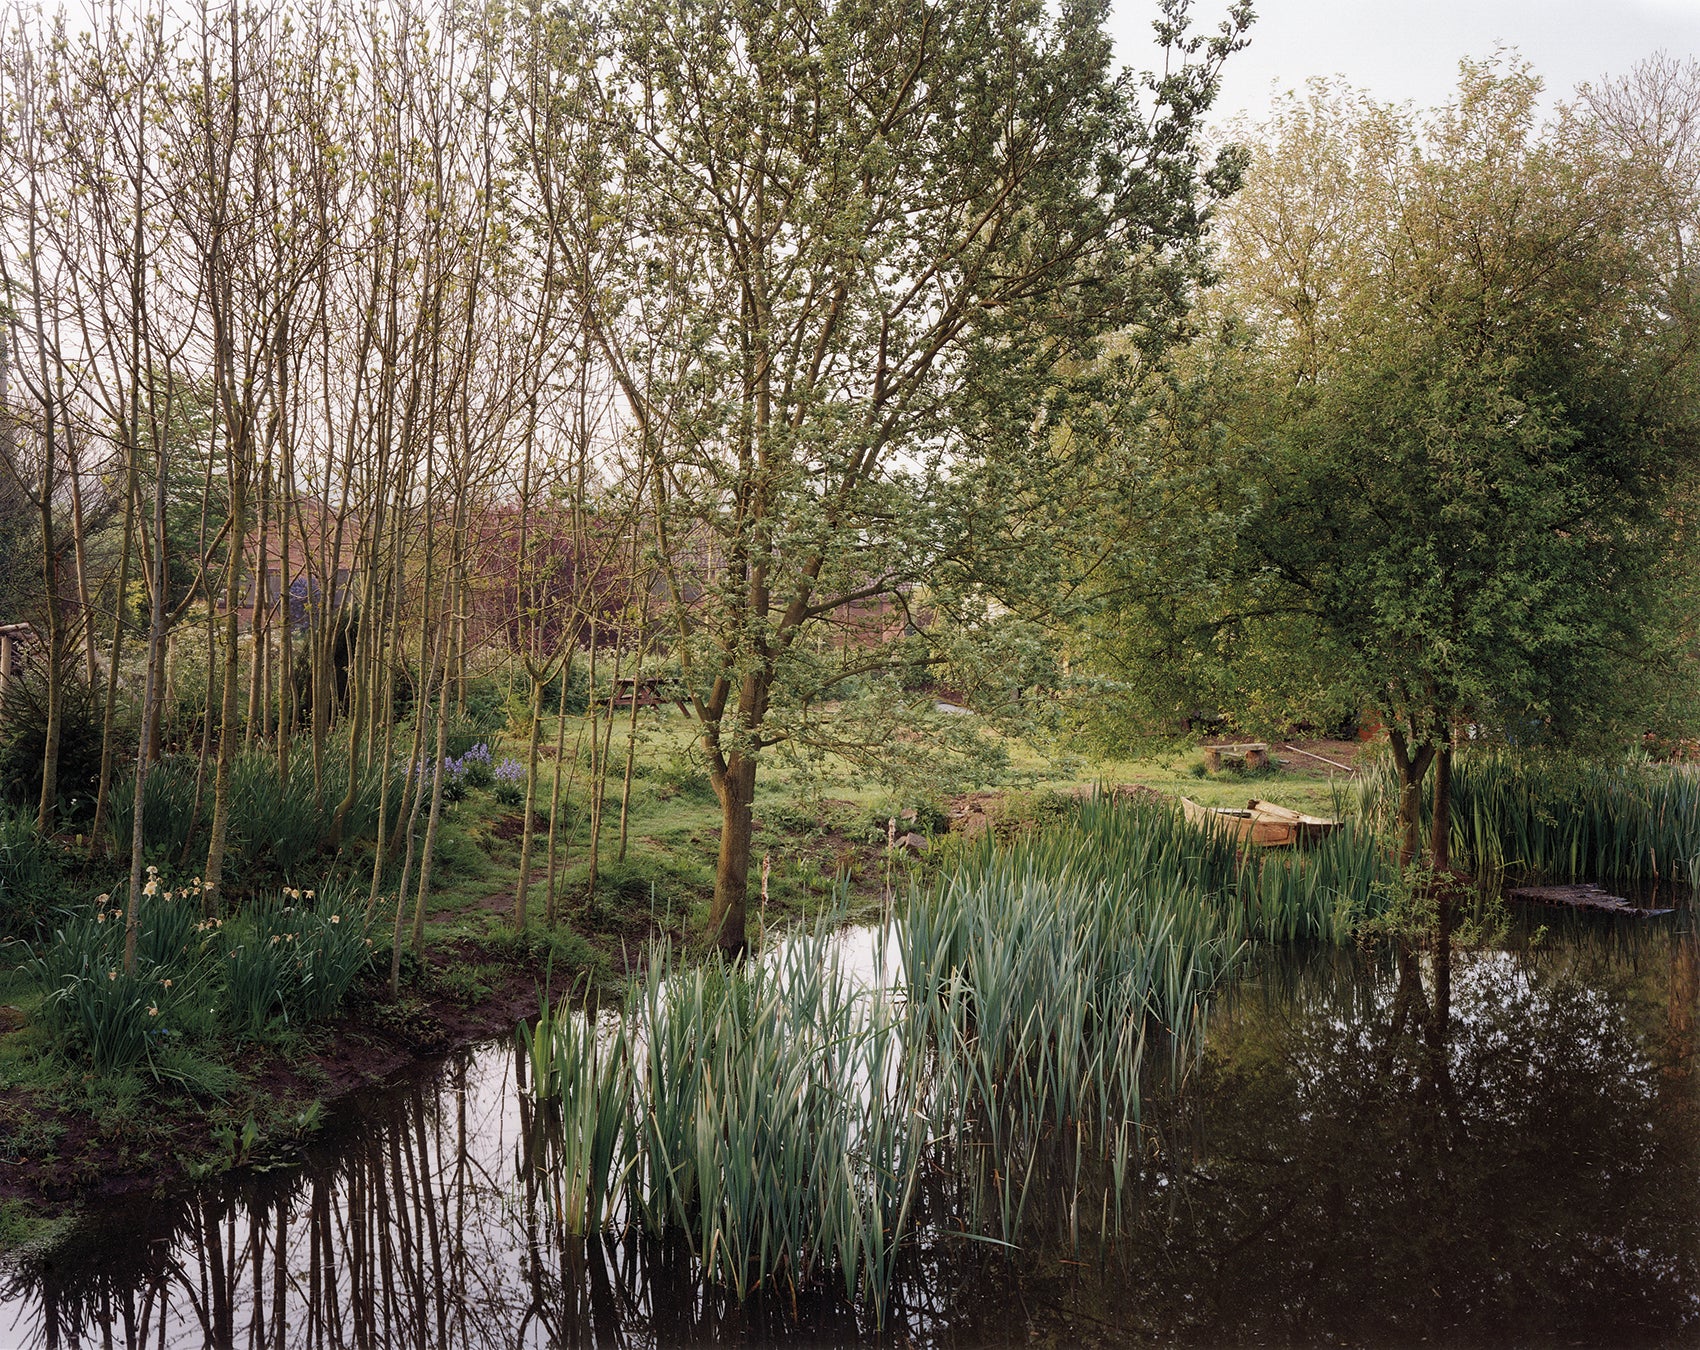 The Pond at Upton Pyne